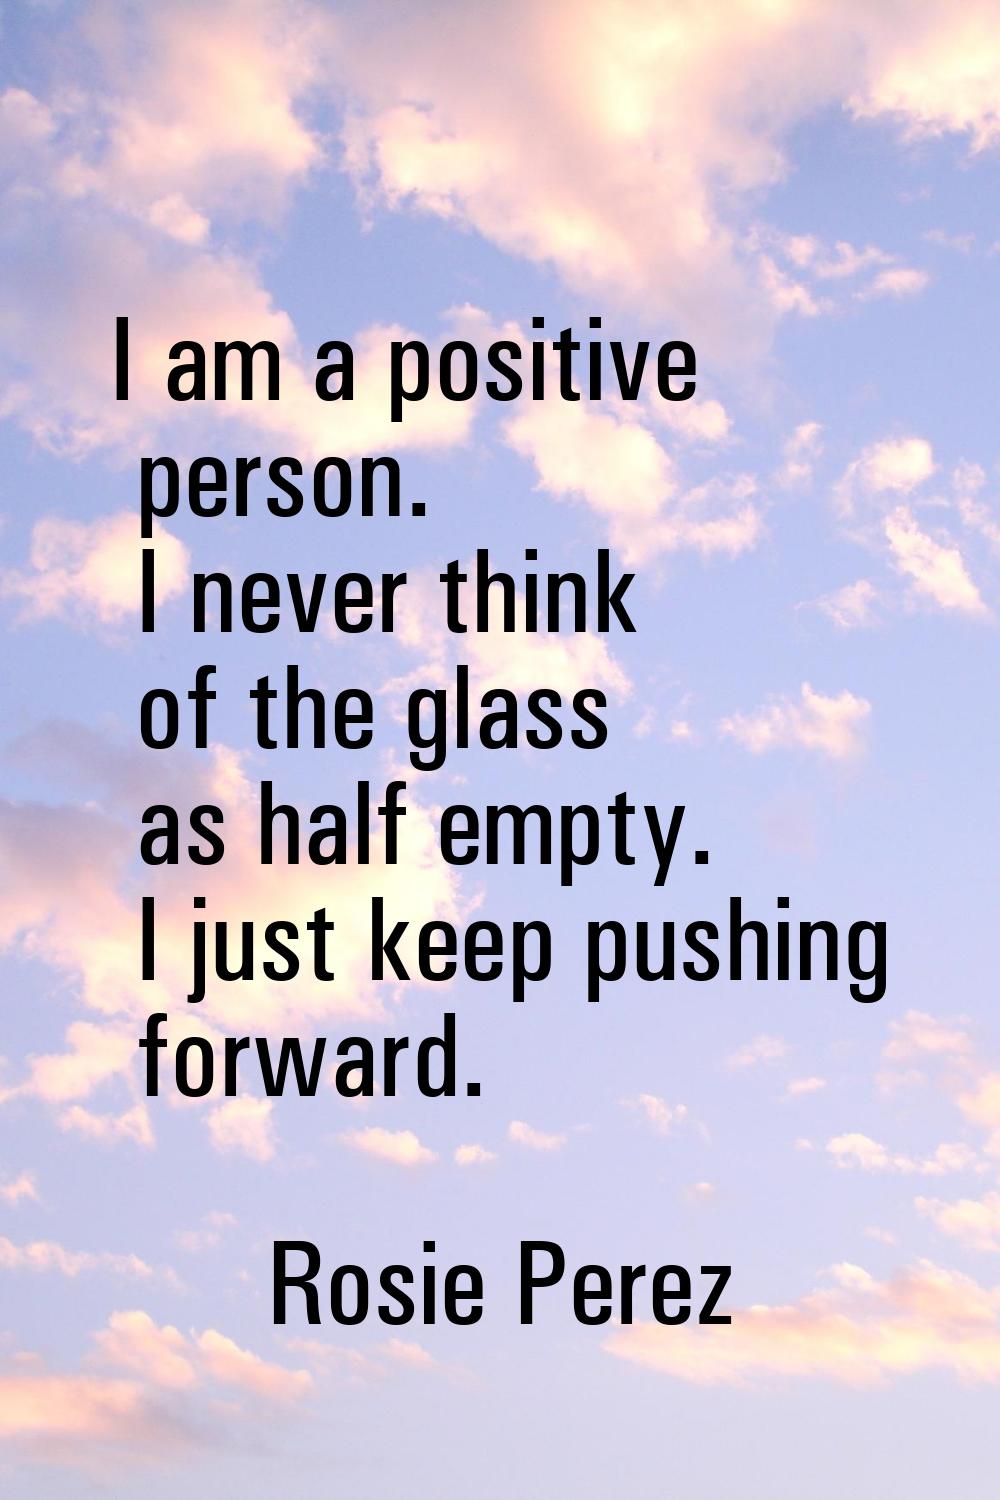 I am a positive person. I never think of the glass as half empty. I just keep pushing forward.